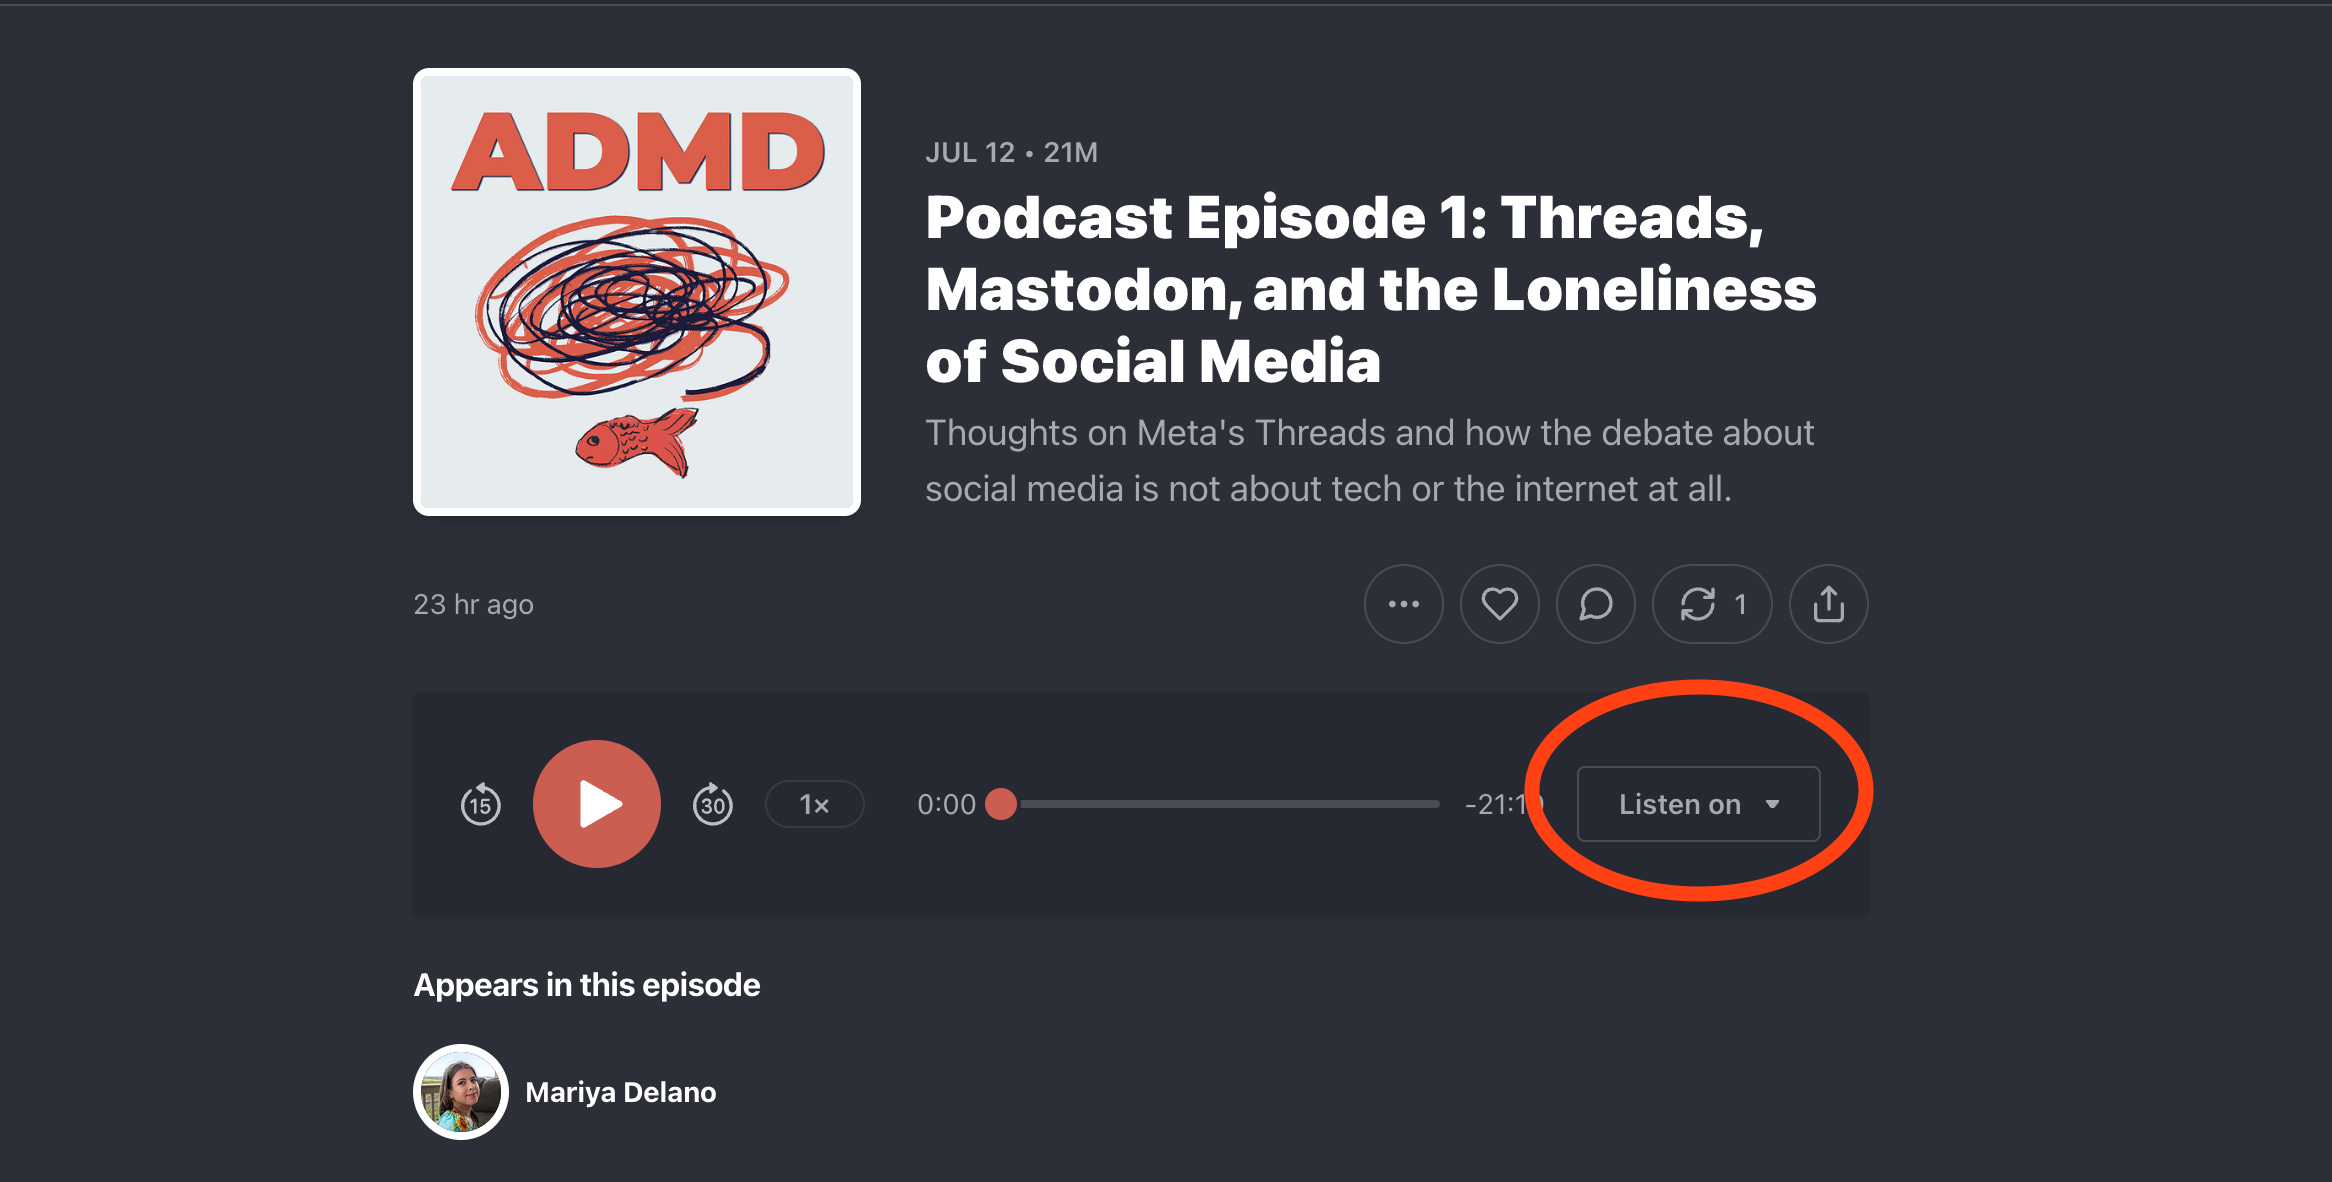 A screenshot from Substack showing this podcast episode with the button "Listen on" circled in red.